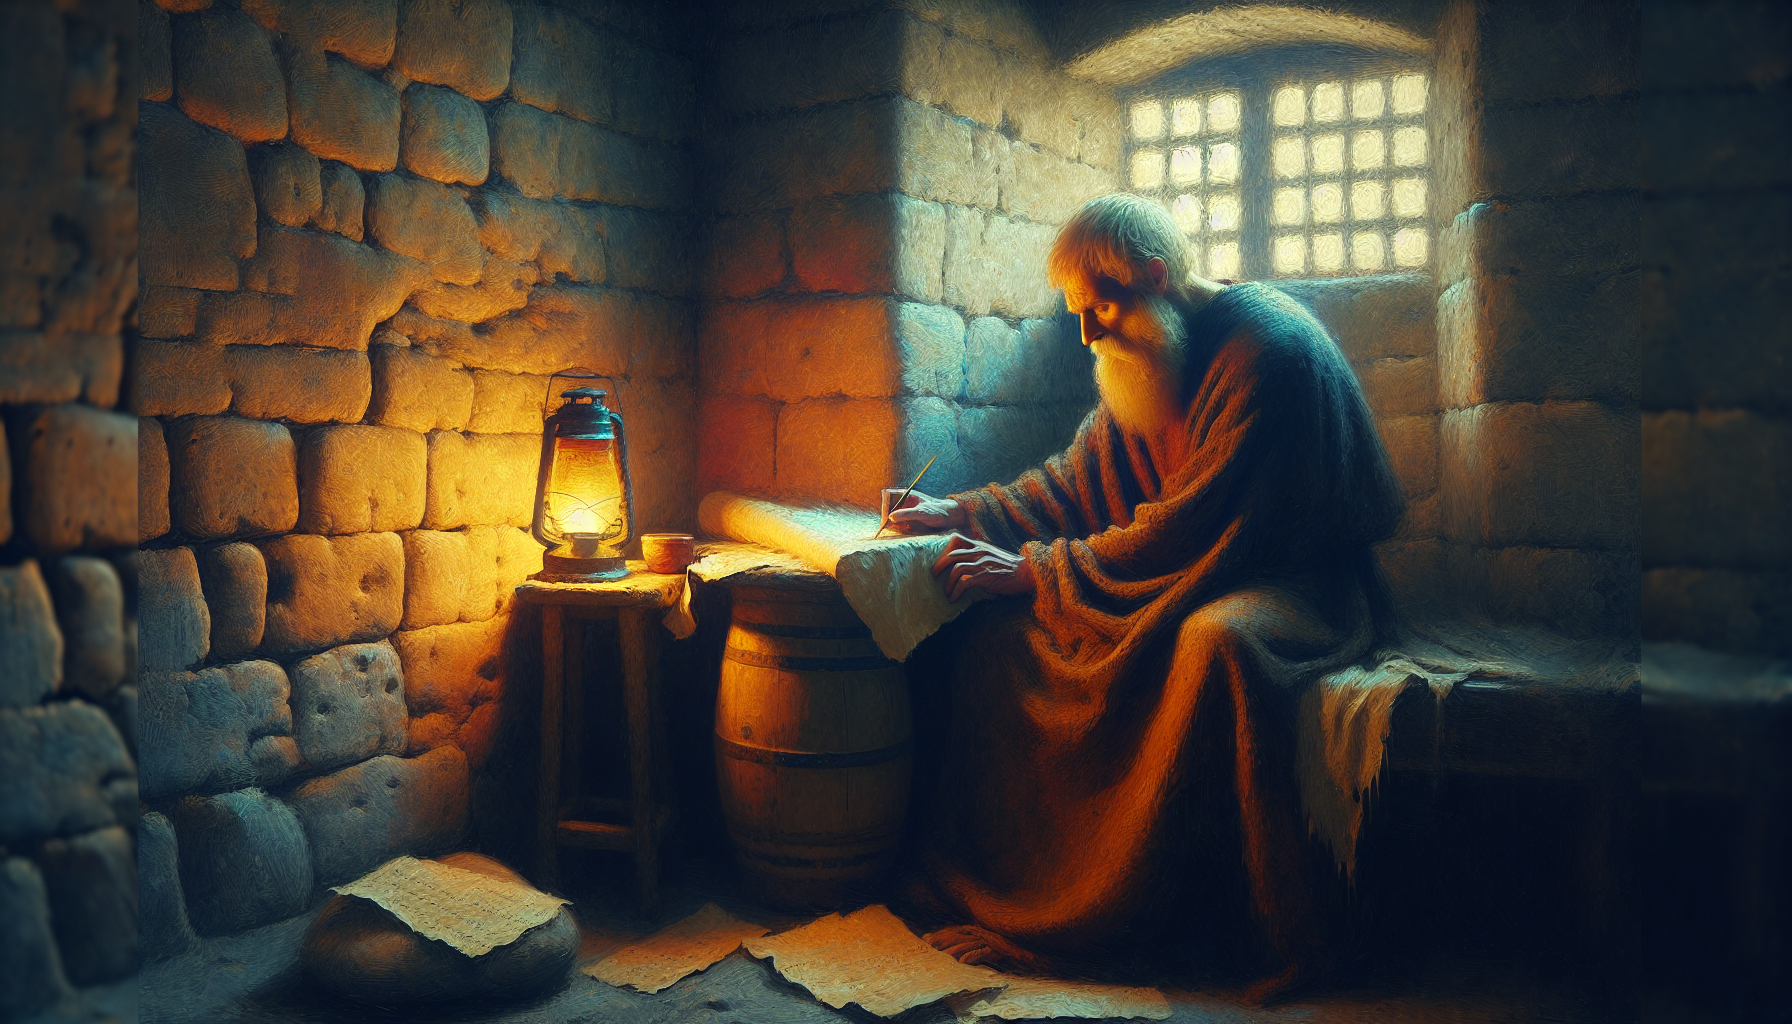 An evocative, painterly depiction of Saint Paul sitting alone in a dimly lit, ancient Roman prison cell, deeply contemplating and writing his final letters, surrounded by rough stone walls and a small